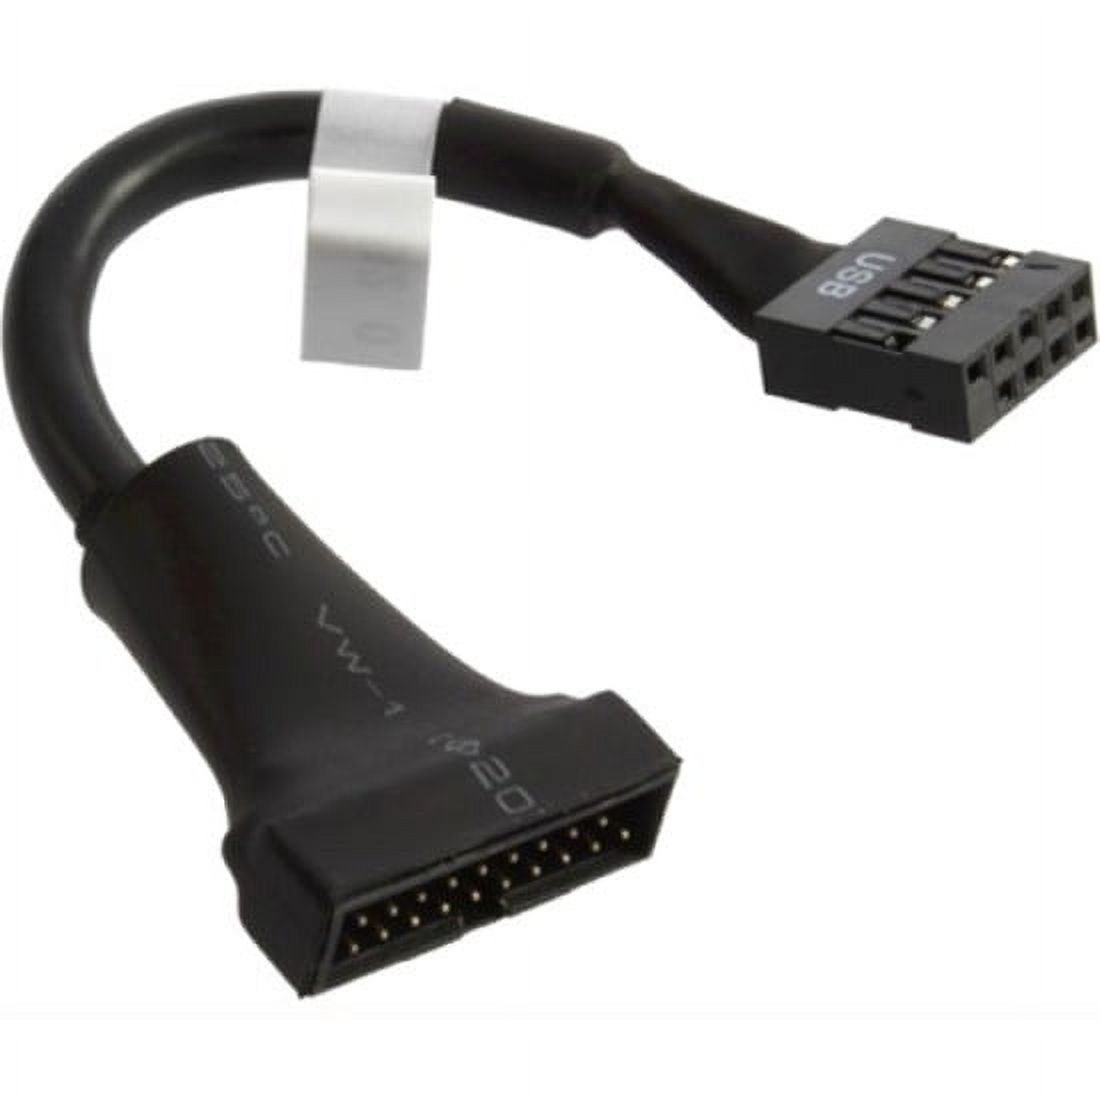 USB 3.0 to USB 2.0 Internal Cable - image 1 of 2